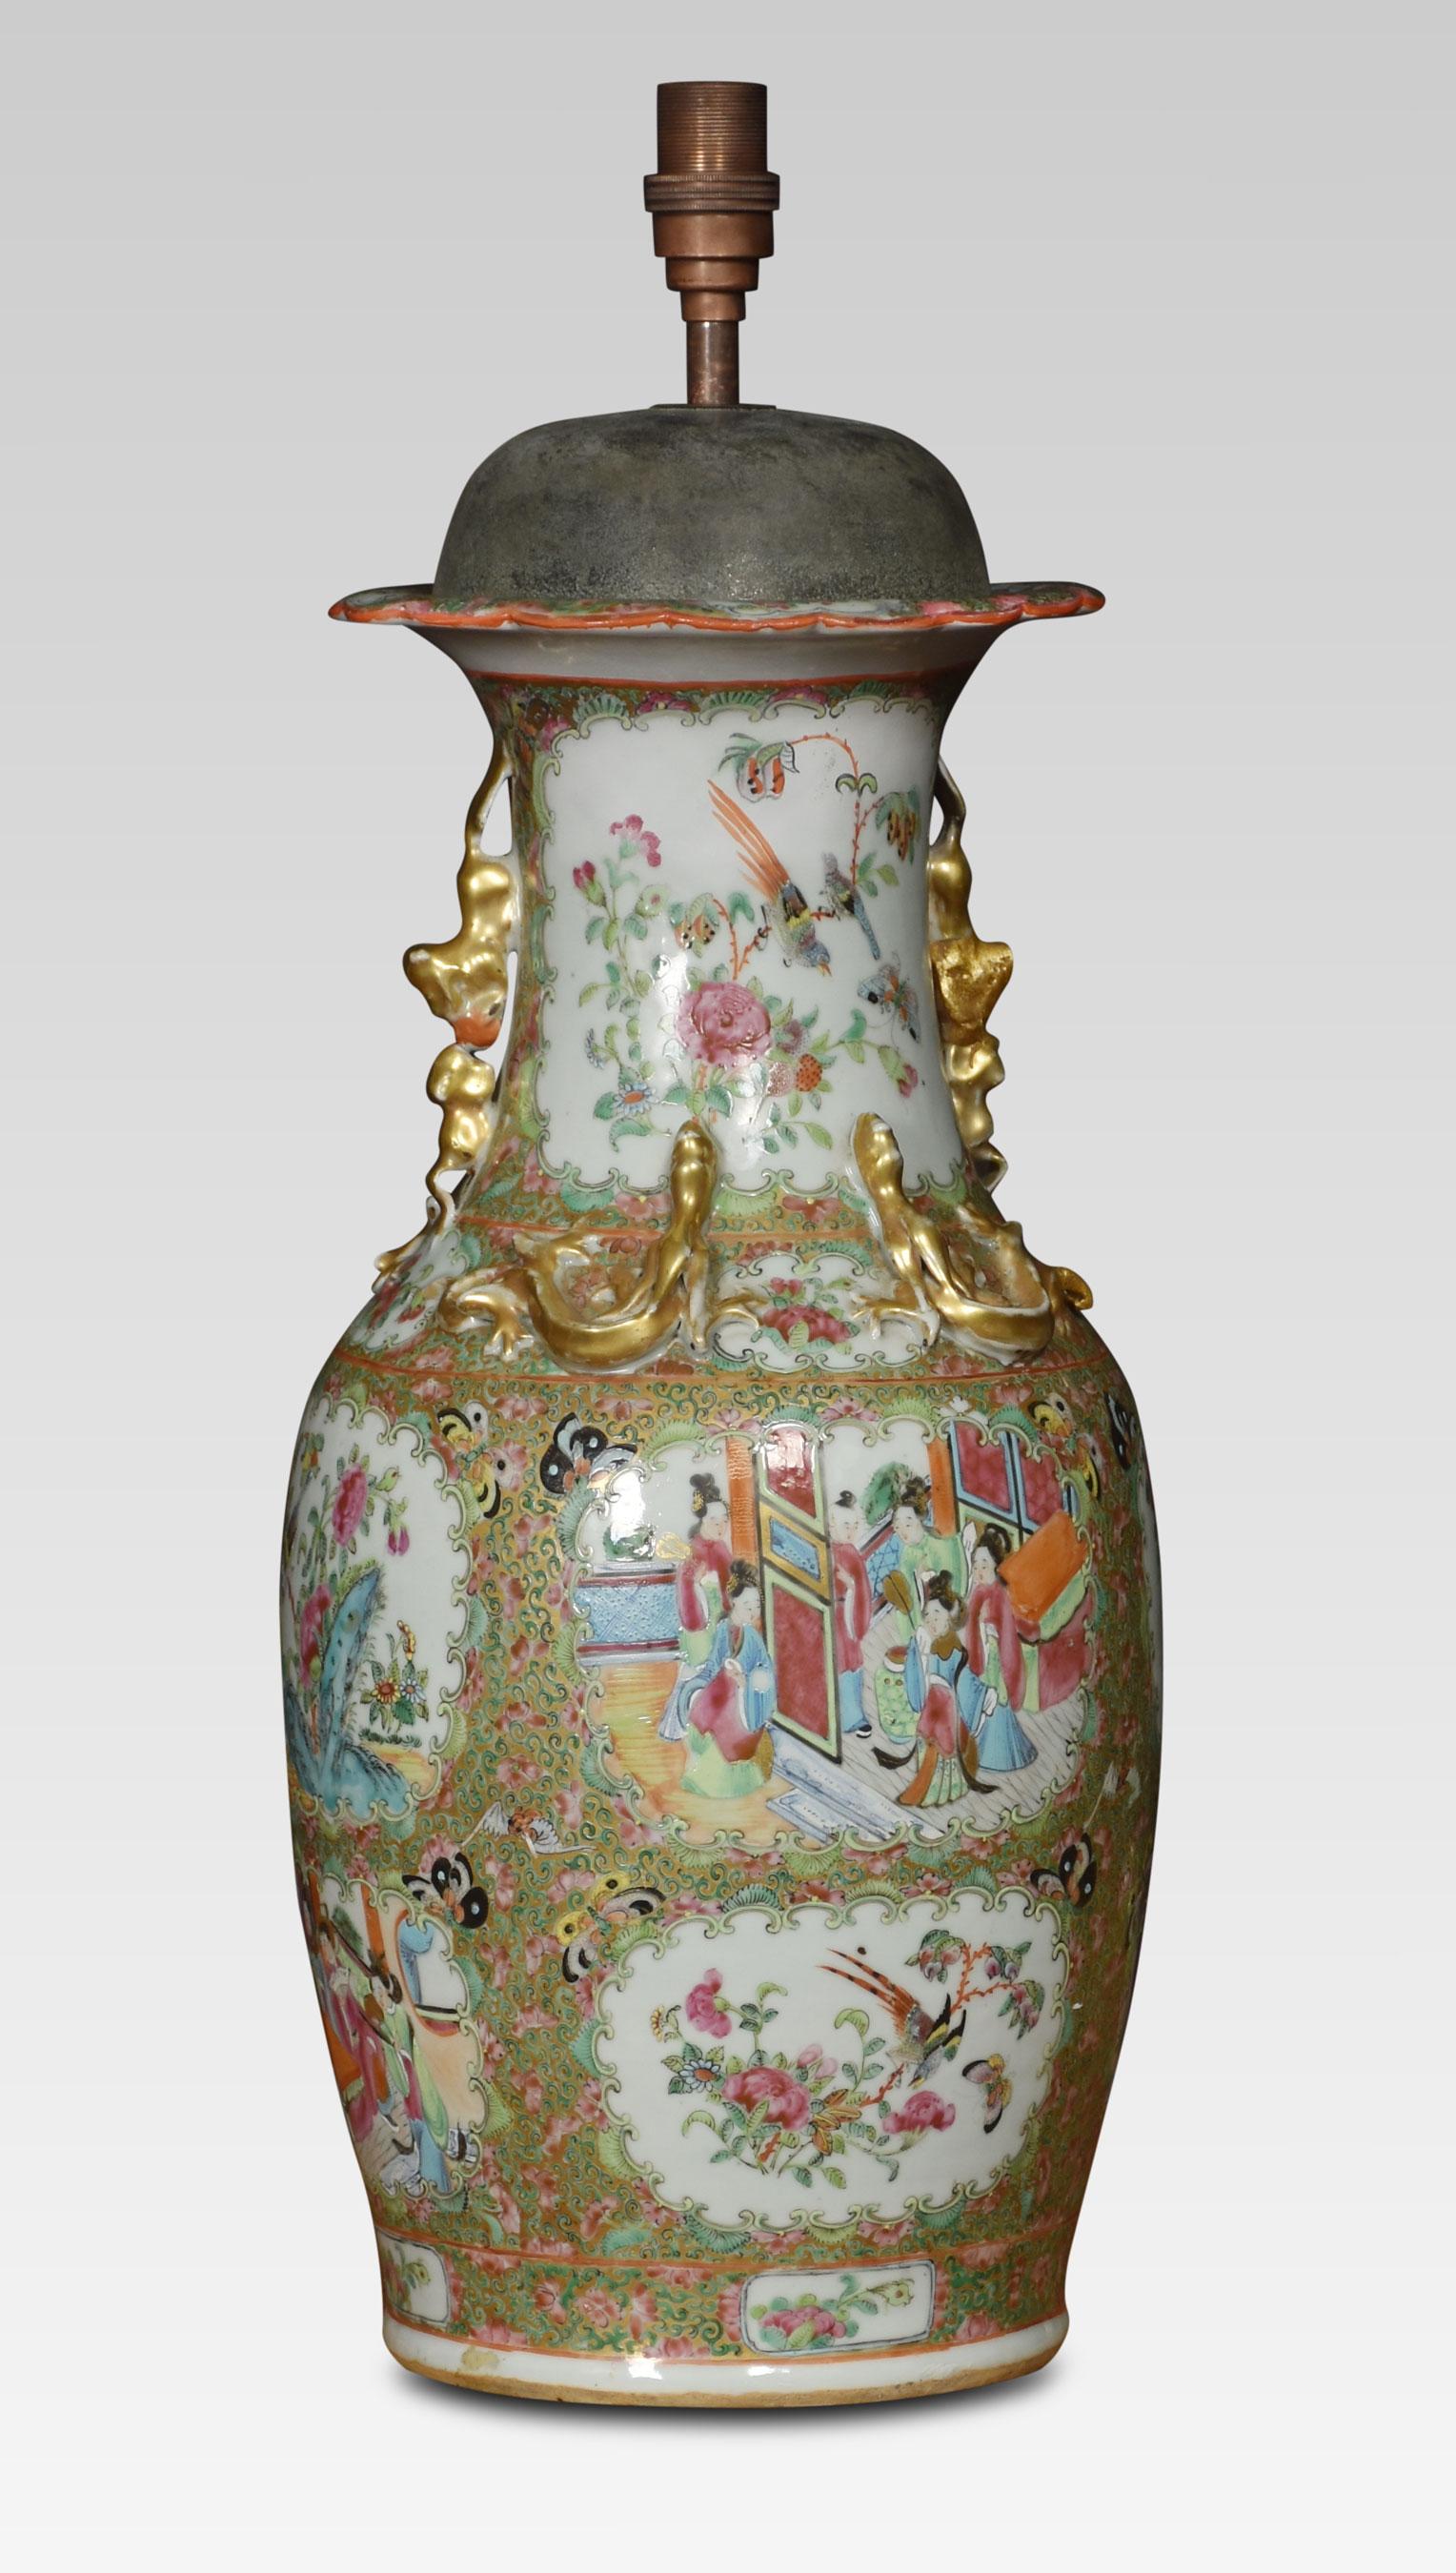 Cantonese twin-handled baluster vases lamp, decorated in the famille rose palette with cartouche panels of figures, exotic birds and insects amongst the foliage. Raised up on a circular base.
Dimensions
Height 22 Inches
Width 8.5 Inches
Depth